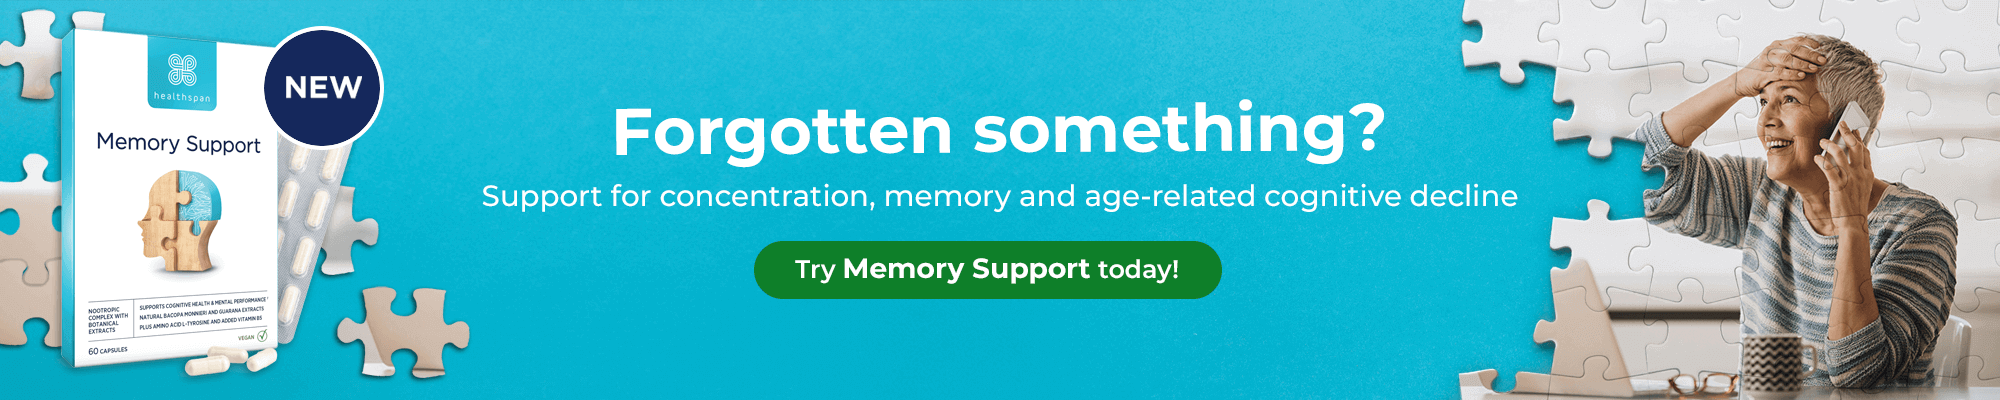 Memory Support - Forgotten something? Support for concentration, memory and age-related cognitive decline. New! Try Memory Support today!